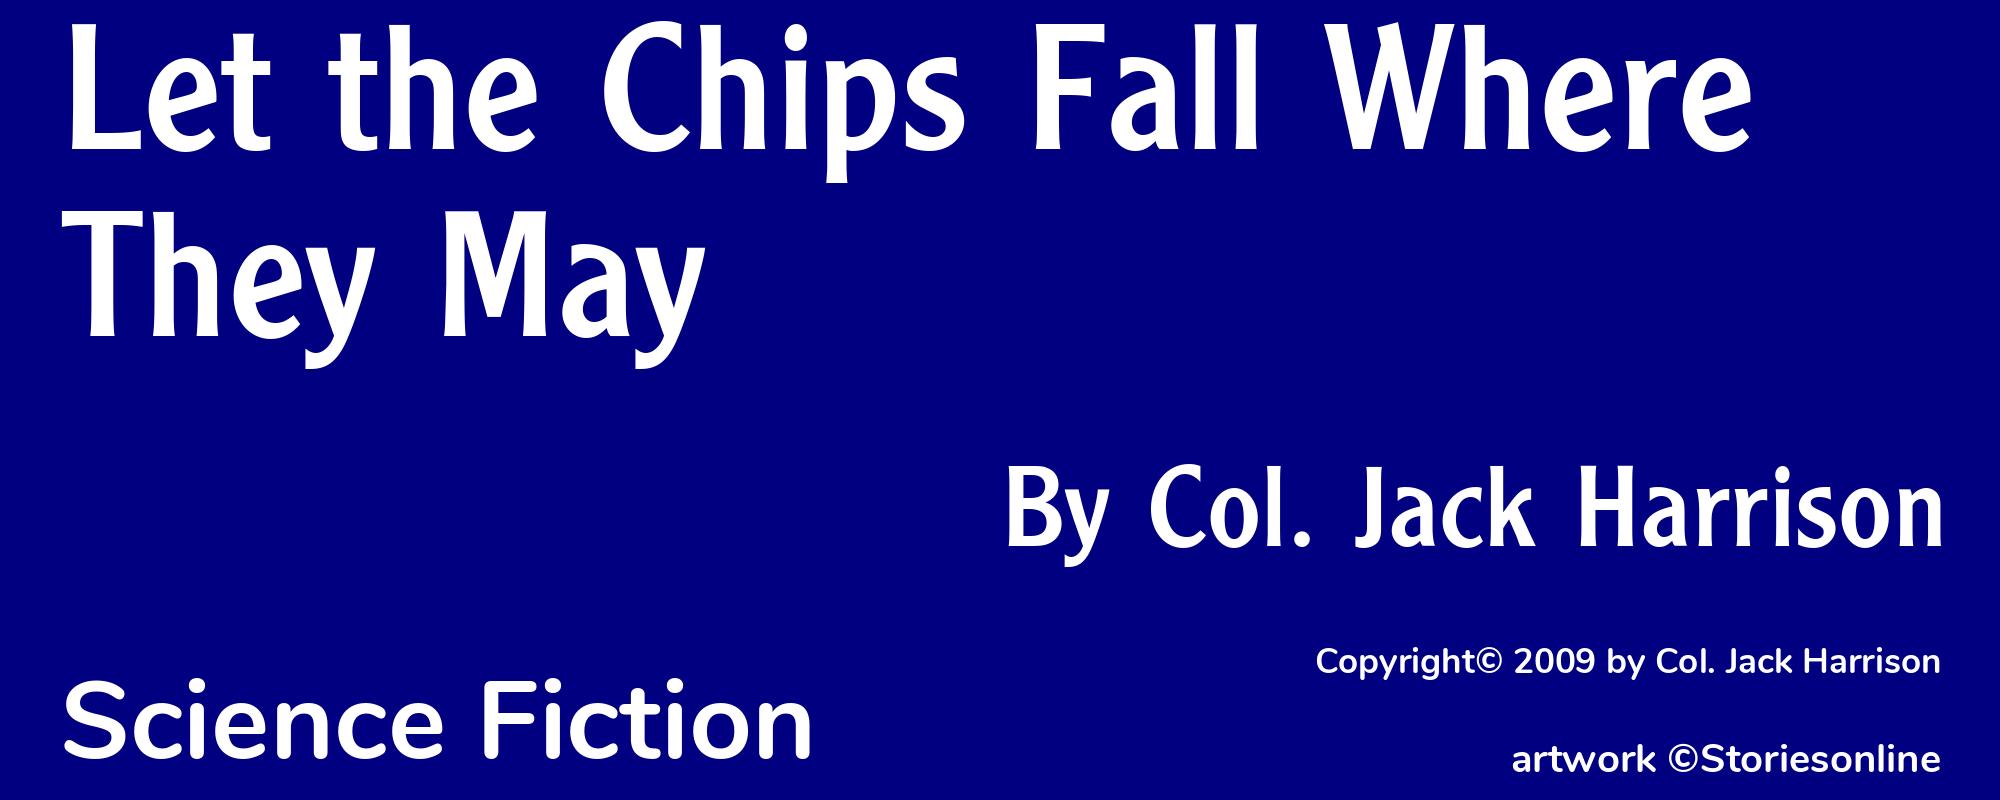 Let the Chips Fall Where They May - Cover